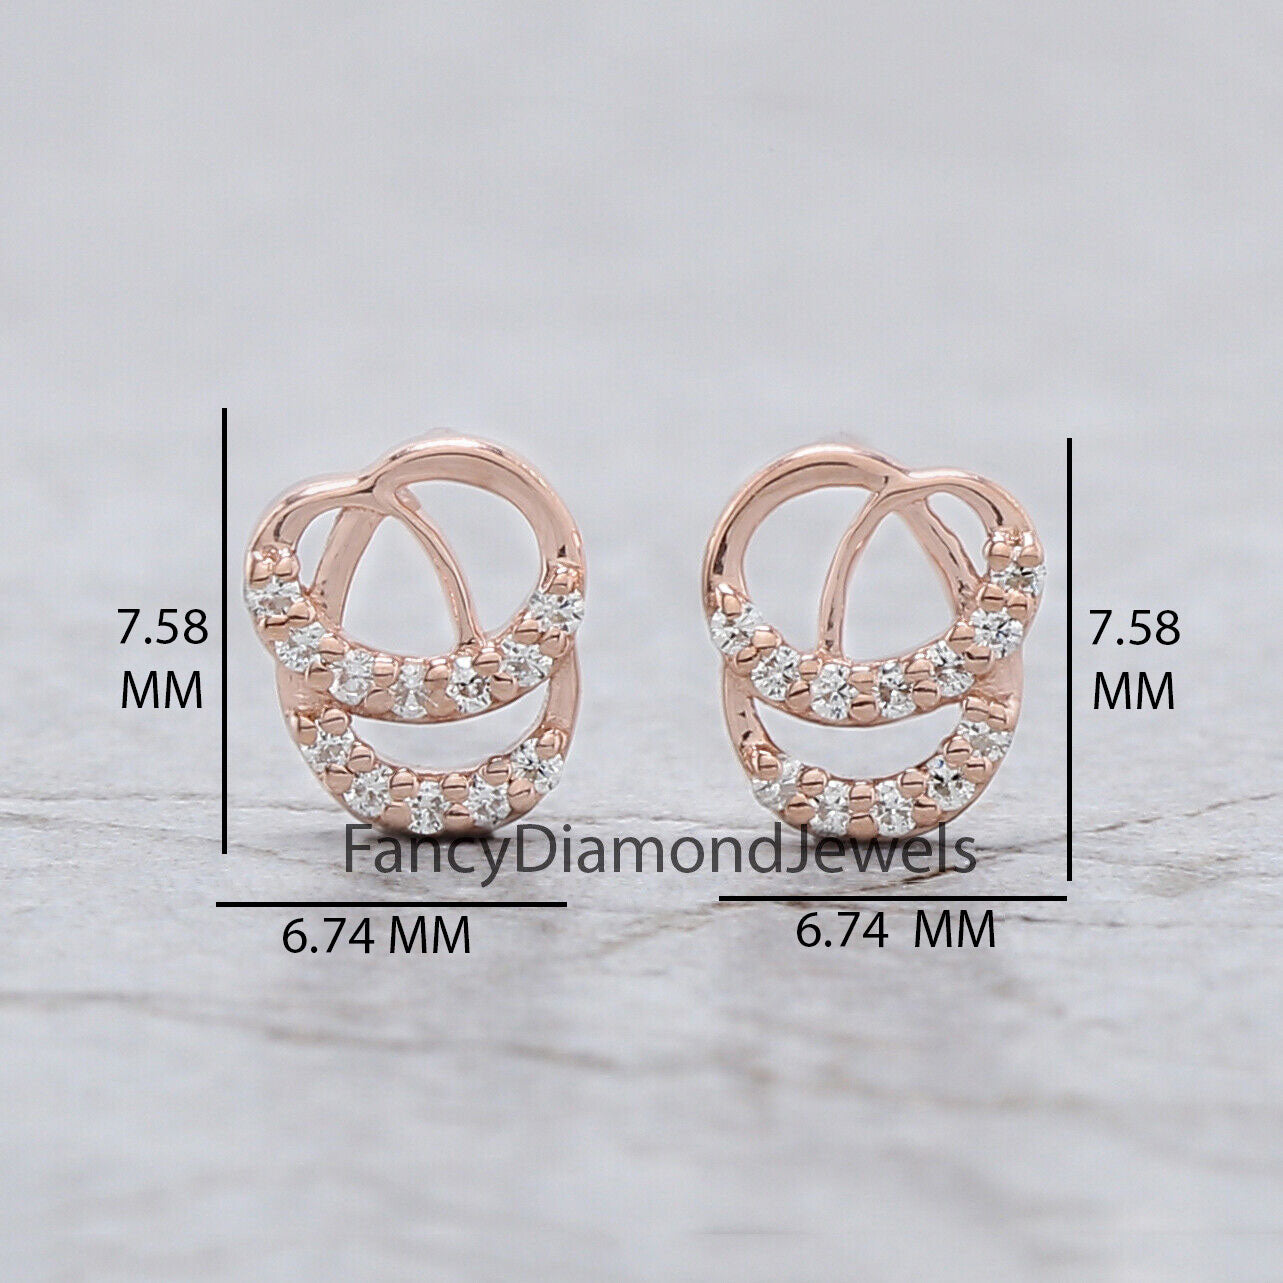 Round White Color Diamond Earring Engagement Wedding Gift Earring 14K Solid Rose White Yellow Gold Earring 0.12 CT KD991